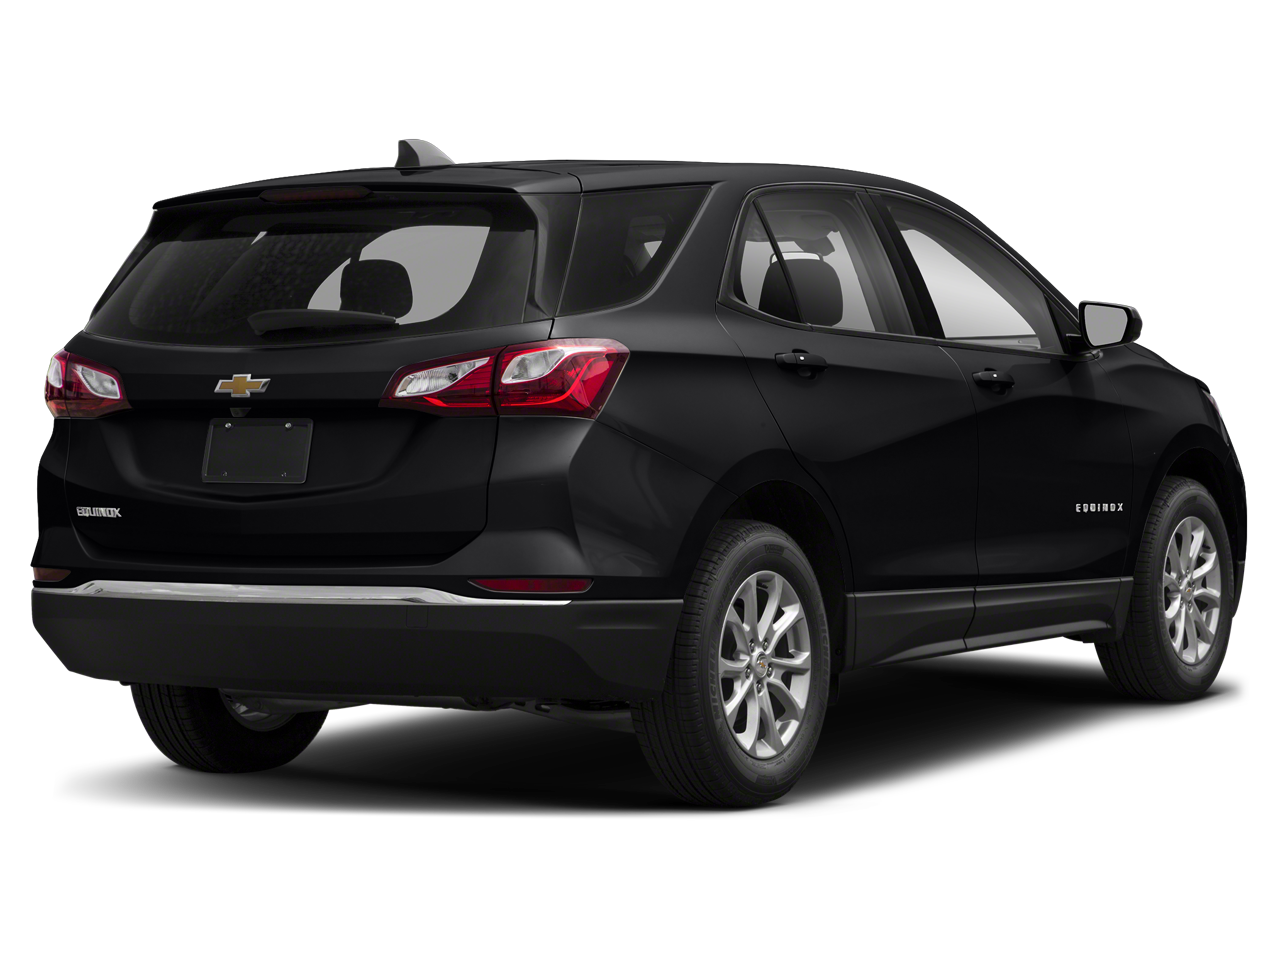 2019 Chevrolet Equinox LS in Lincoln City, OR - Power in Lincoln City